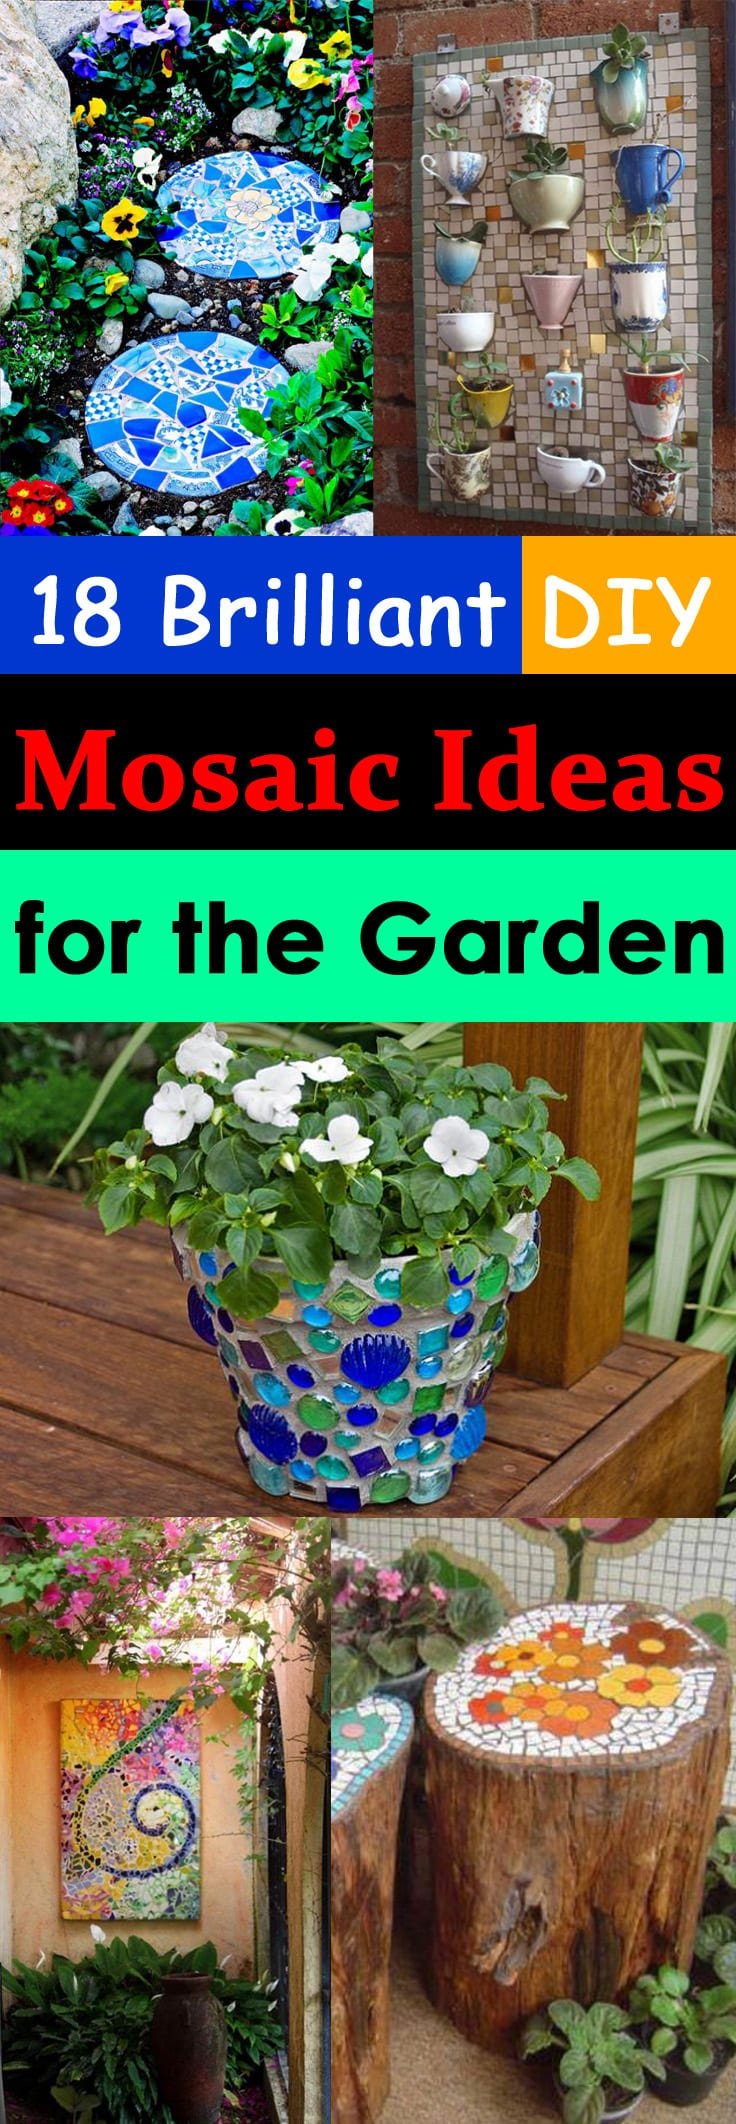 DIY Mosaic projects are really popular these days and here're a few creative DIY mosaic ideas for garden to follow.